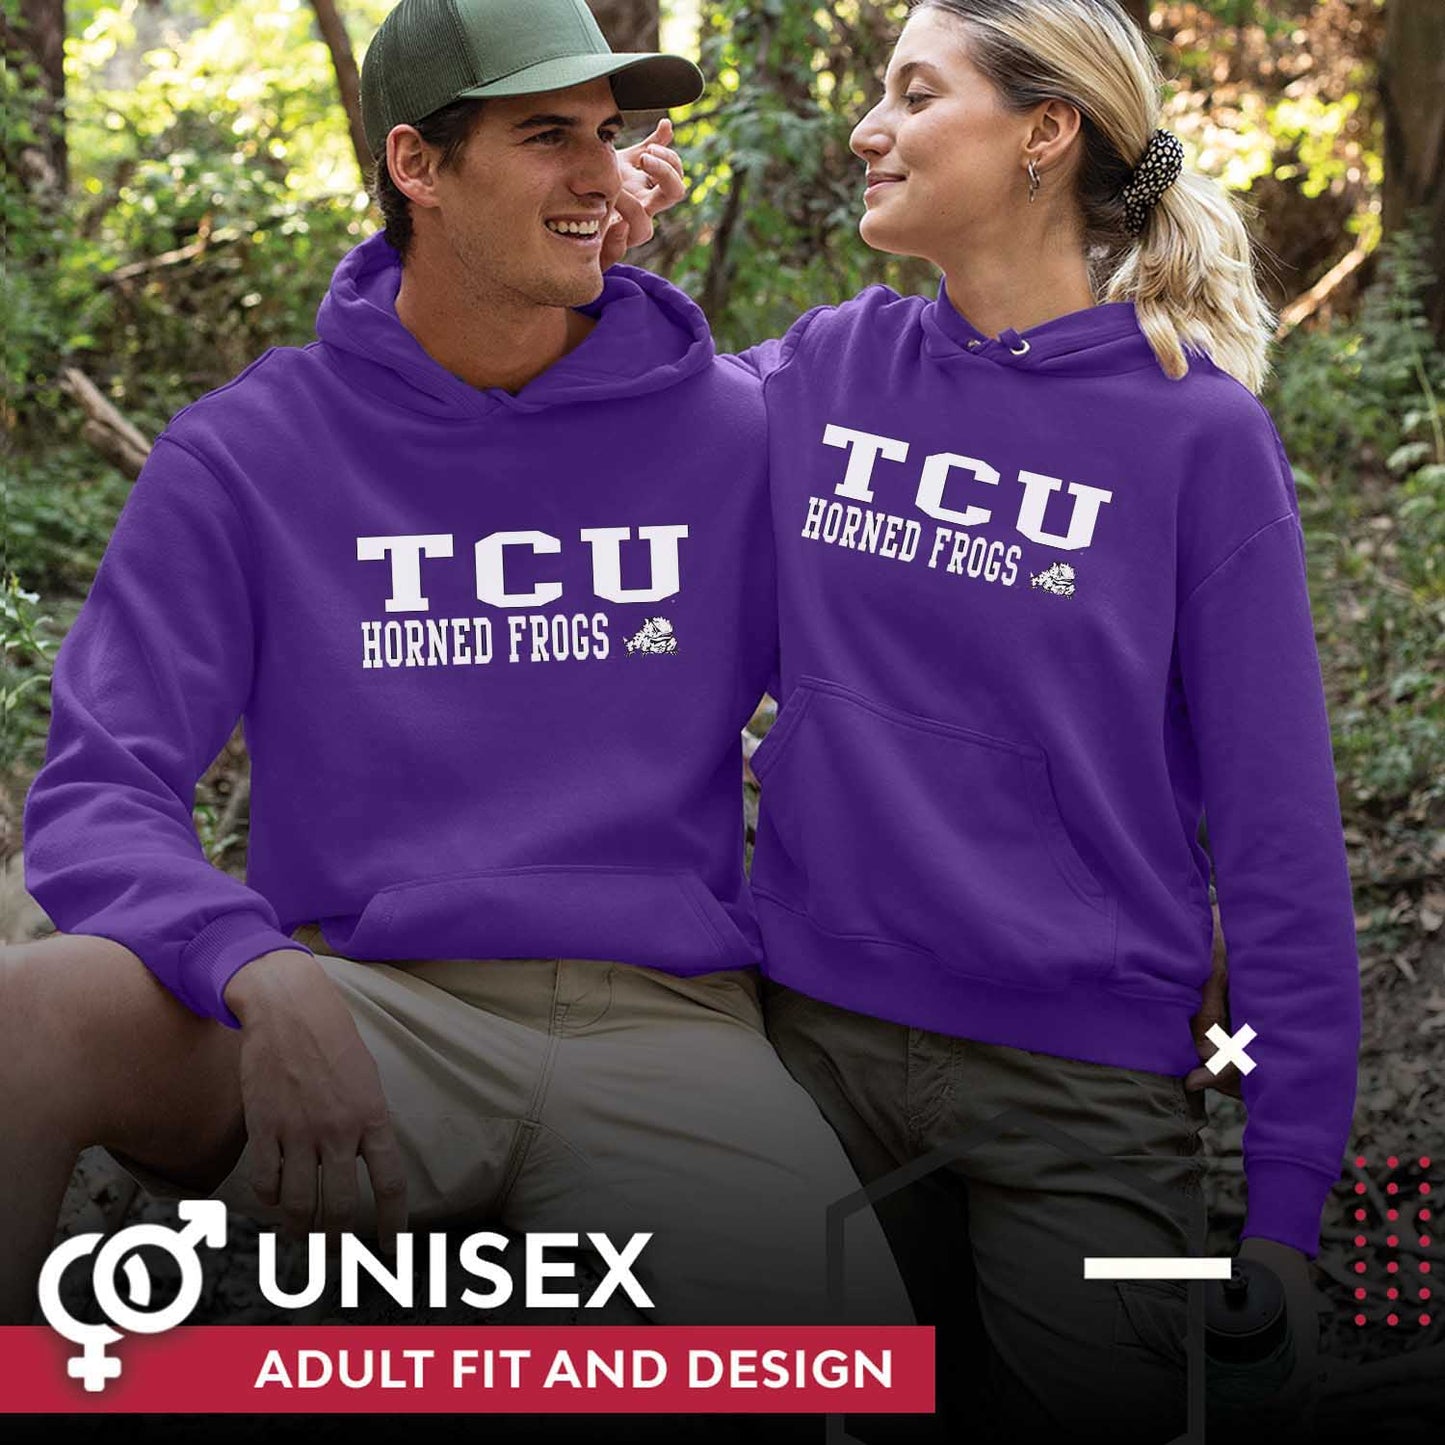 TCU Horned Frogs Adult Arch & Logo Soft Style Gameday Hooded Sweatshirt - Purple